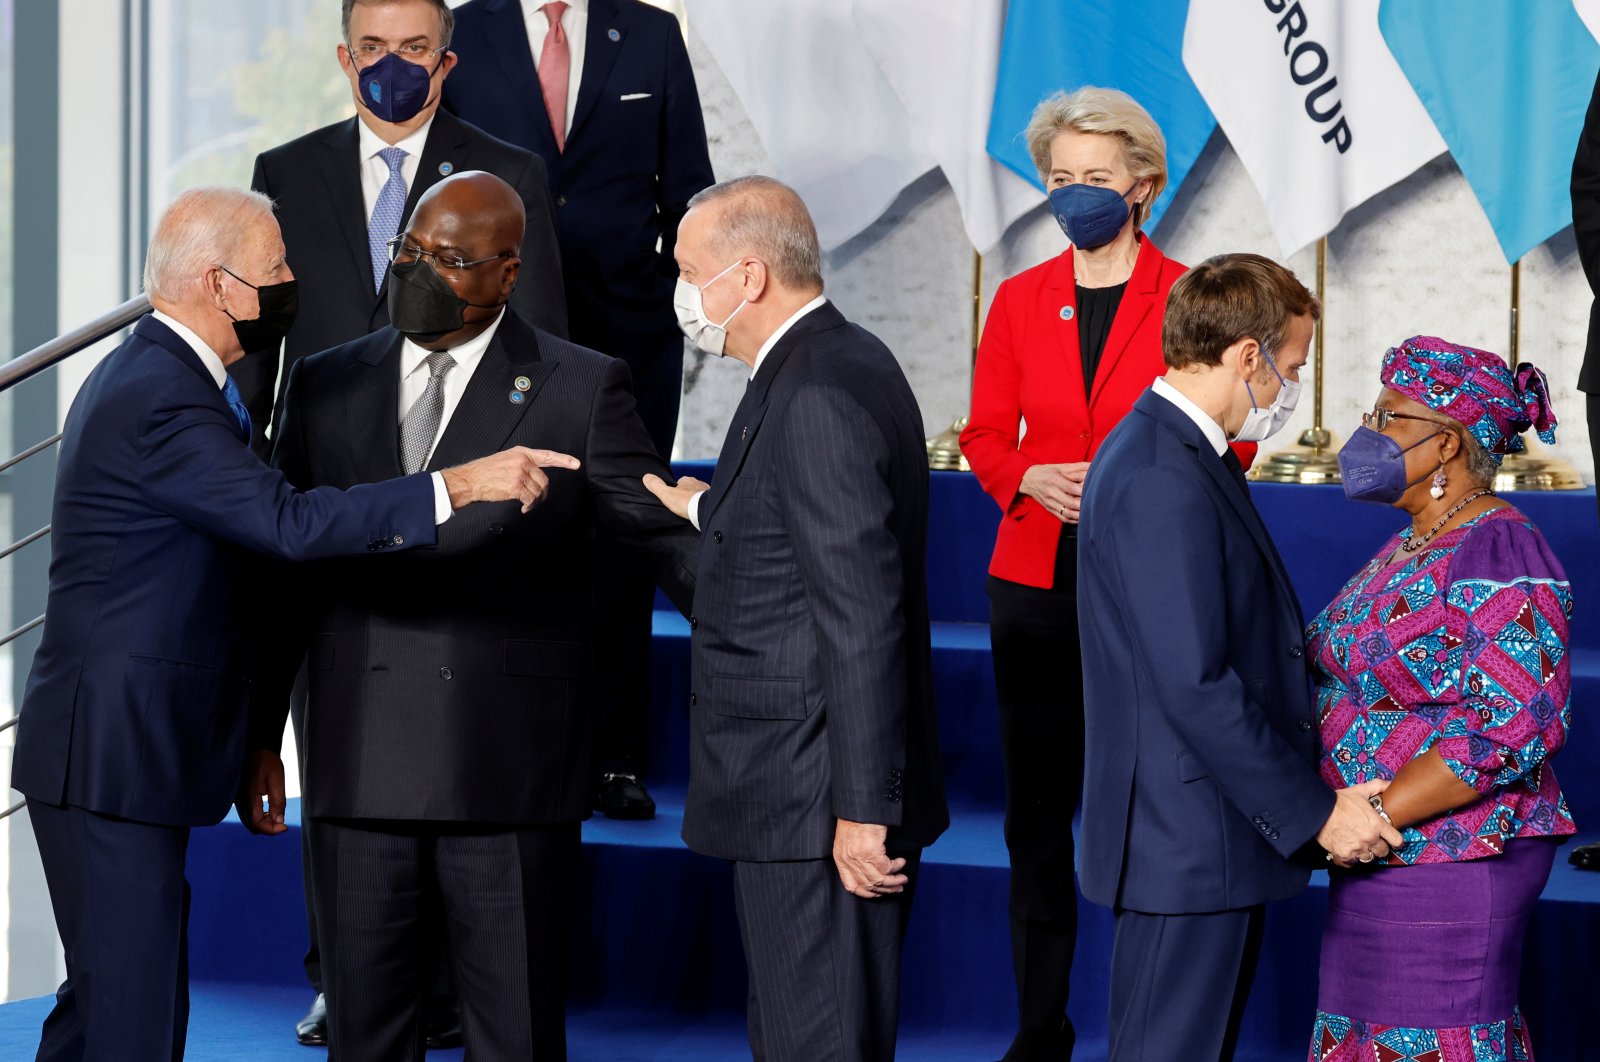 (Foreground) U.S. President Joe Biden (1st L) gestures toward President Recep Tayyip Erdoğan (3rd L) and French President Emmanuel Macron (2nd R) greets Director-General of the World Trade Organization Ngozi Okonjo-Iweala (1st R), as European Commission President Ursula von der Leyen (3rd R) looks on at the start of the G-20 summit at the convention center of La Nuvola, Rome, Italy, Oct. 30, 2021. (Ludovic Marin/Pool via REUTERS)